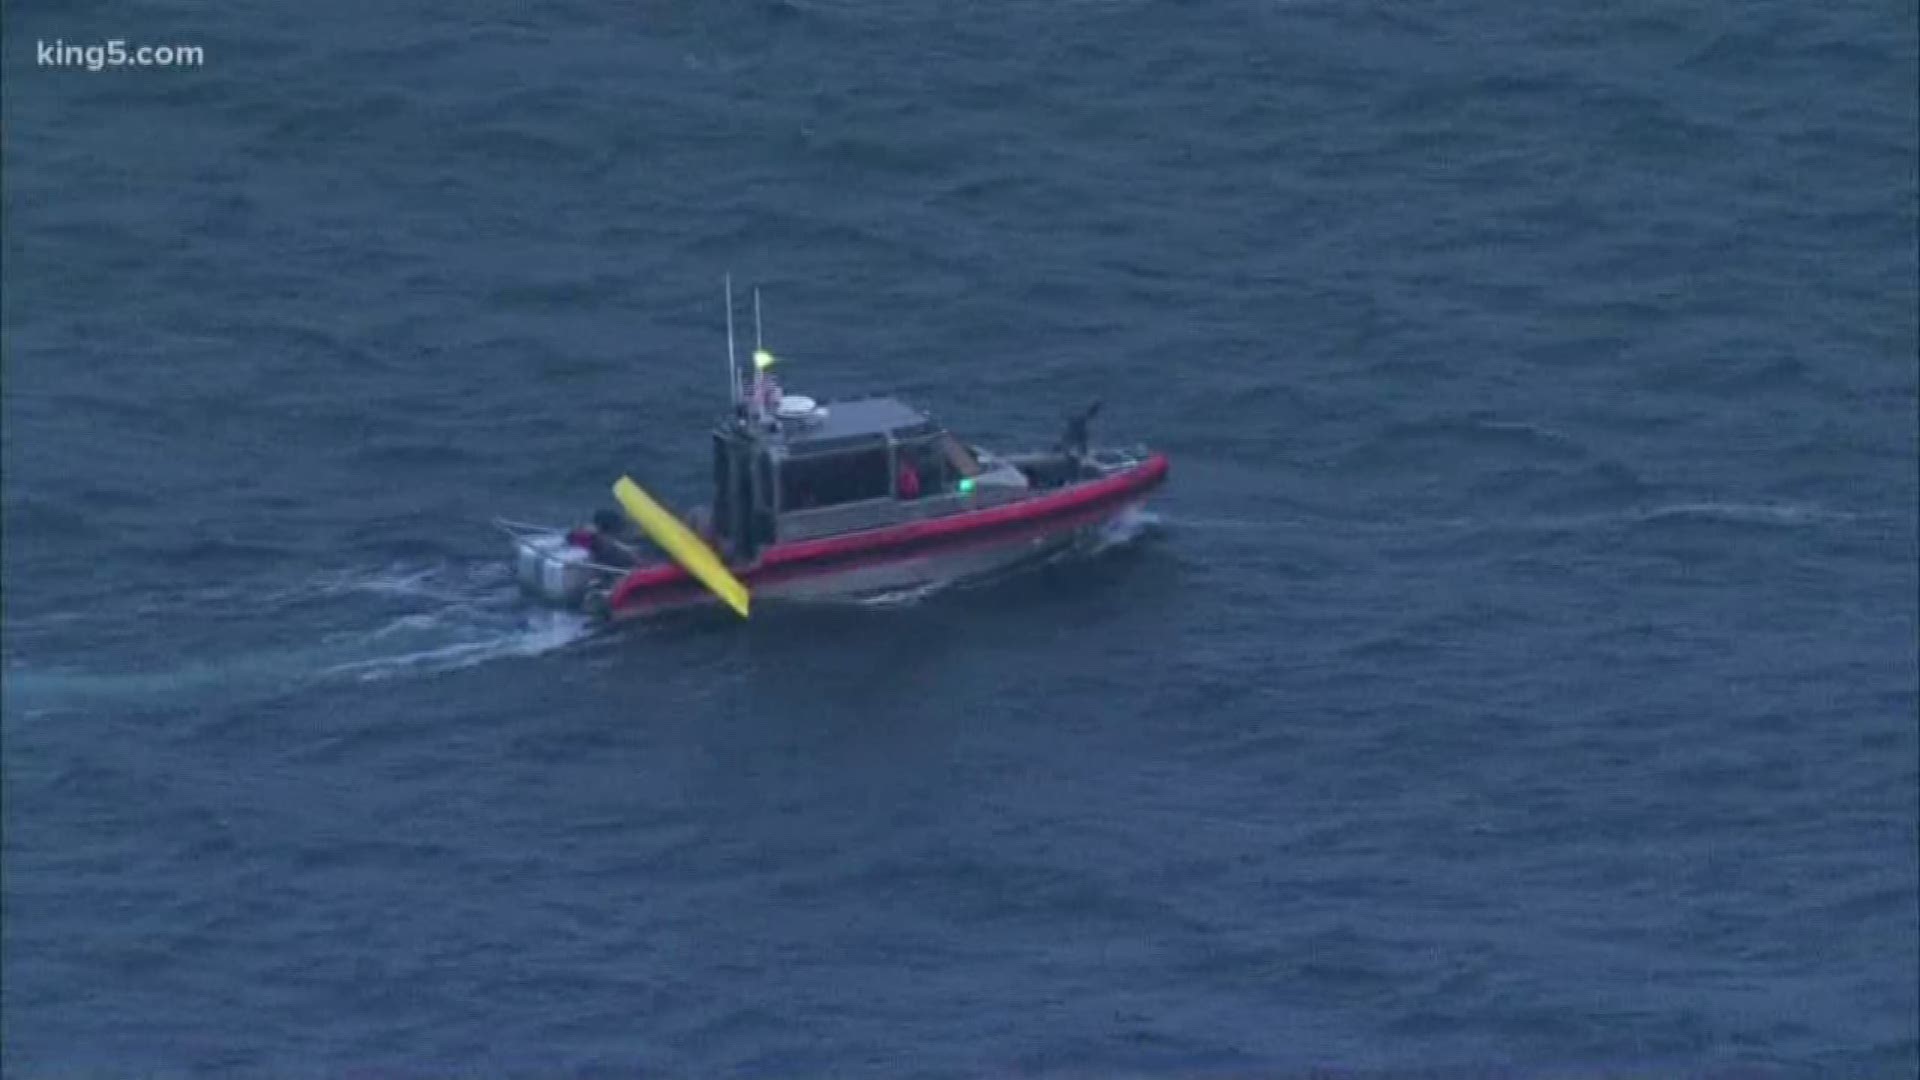 The U.S. Coast Guard is searching for the missing paddler.  One other person was already rescued.